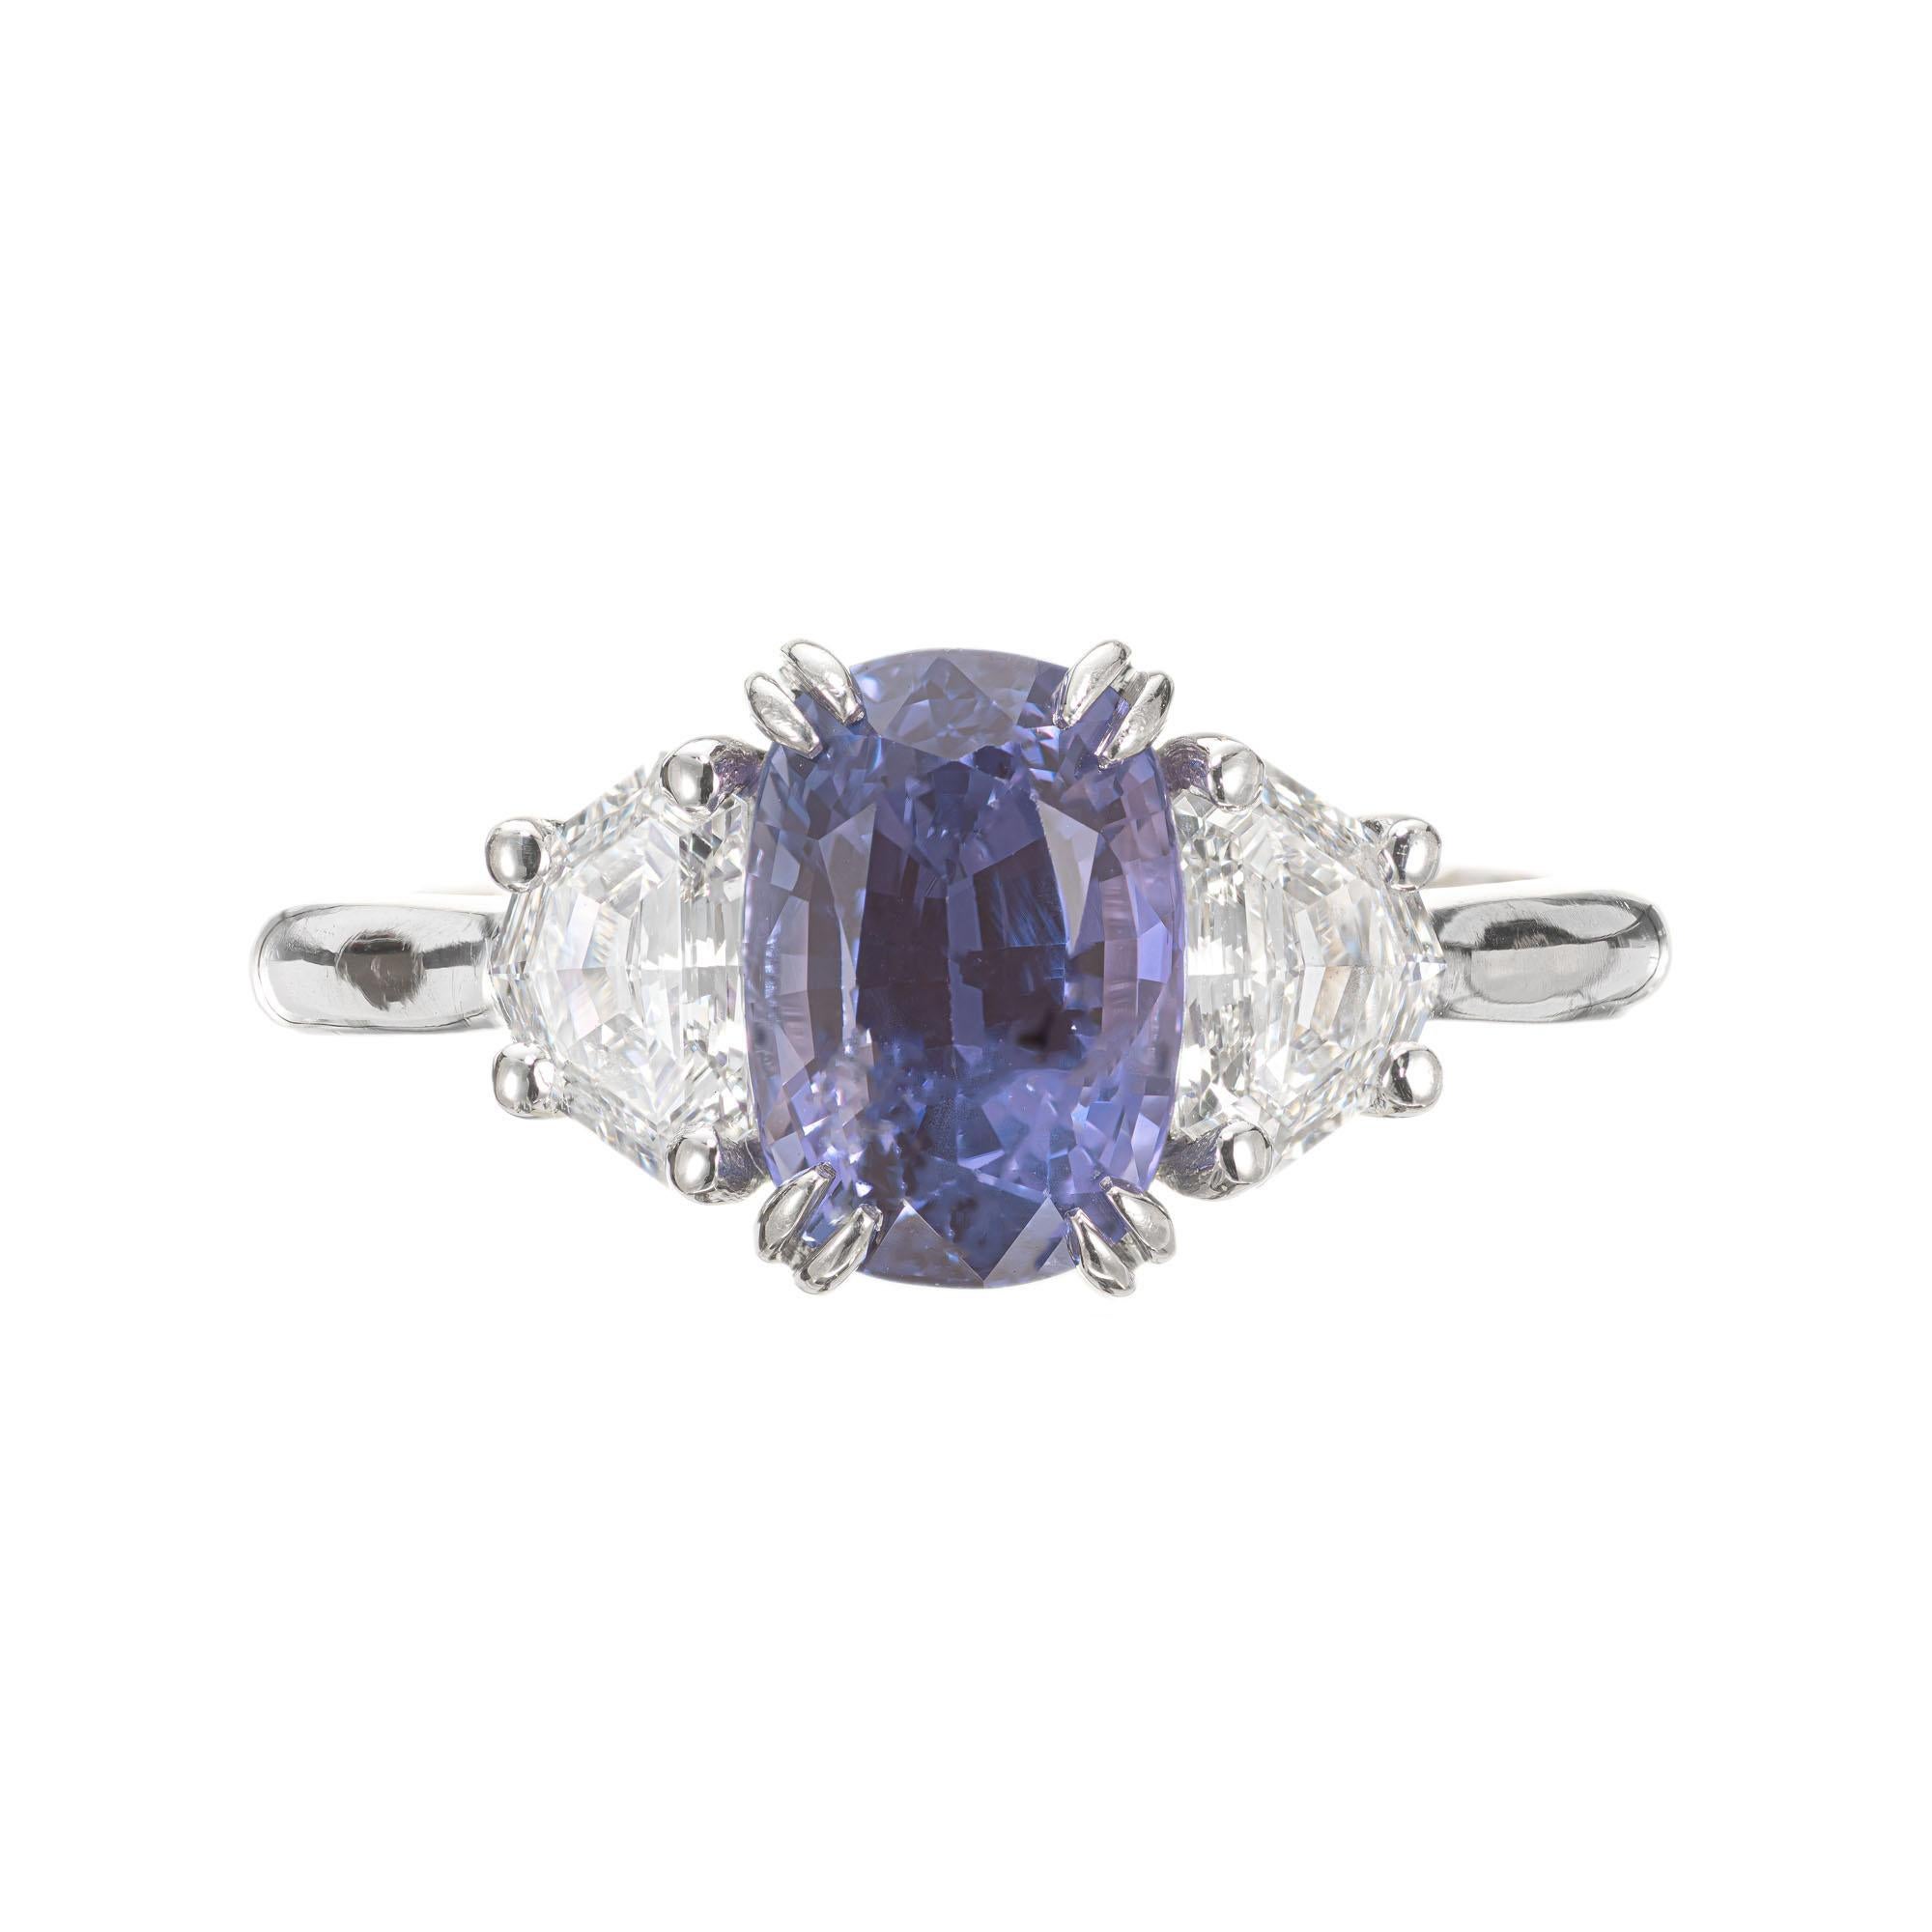 Sapphire and diamond engagement ring. GIA certified purple cushion cut center sapphire, changes color from violet blue to purple in different lights. Set in a platinum three-stone setting with 2 Art Deco step cut shield side diamonds. The sapphire